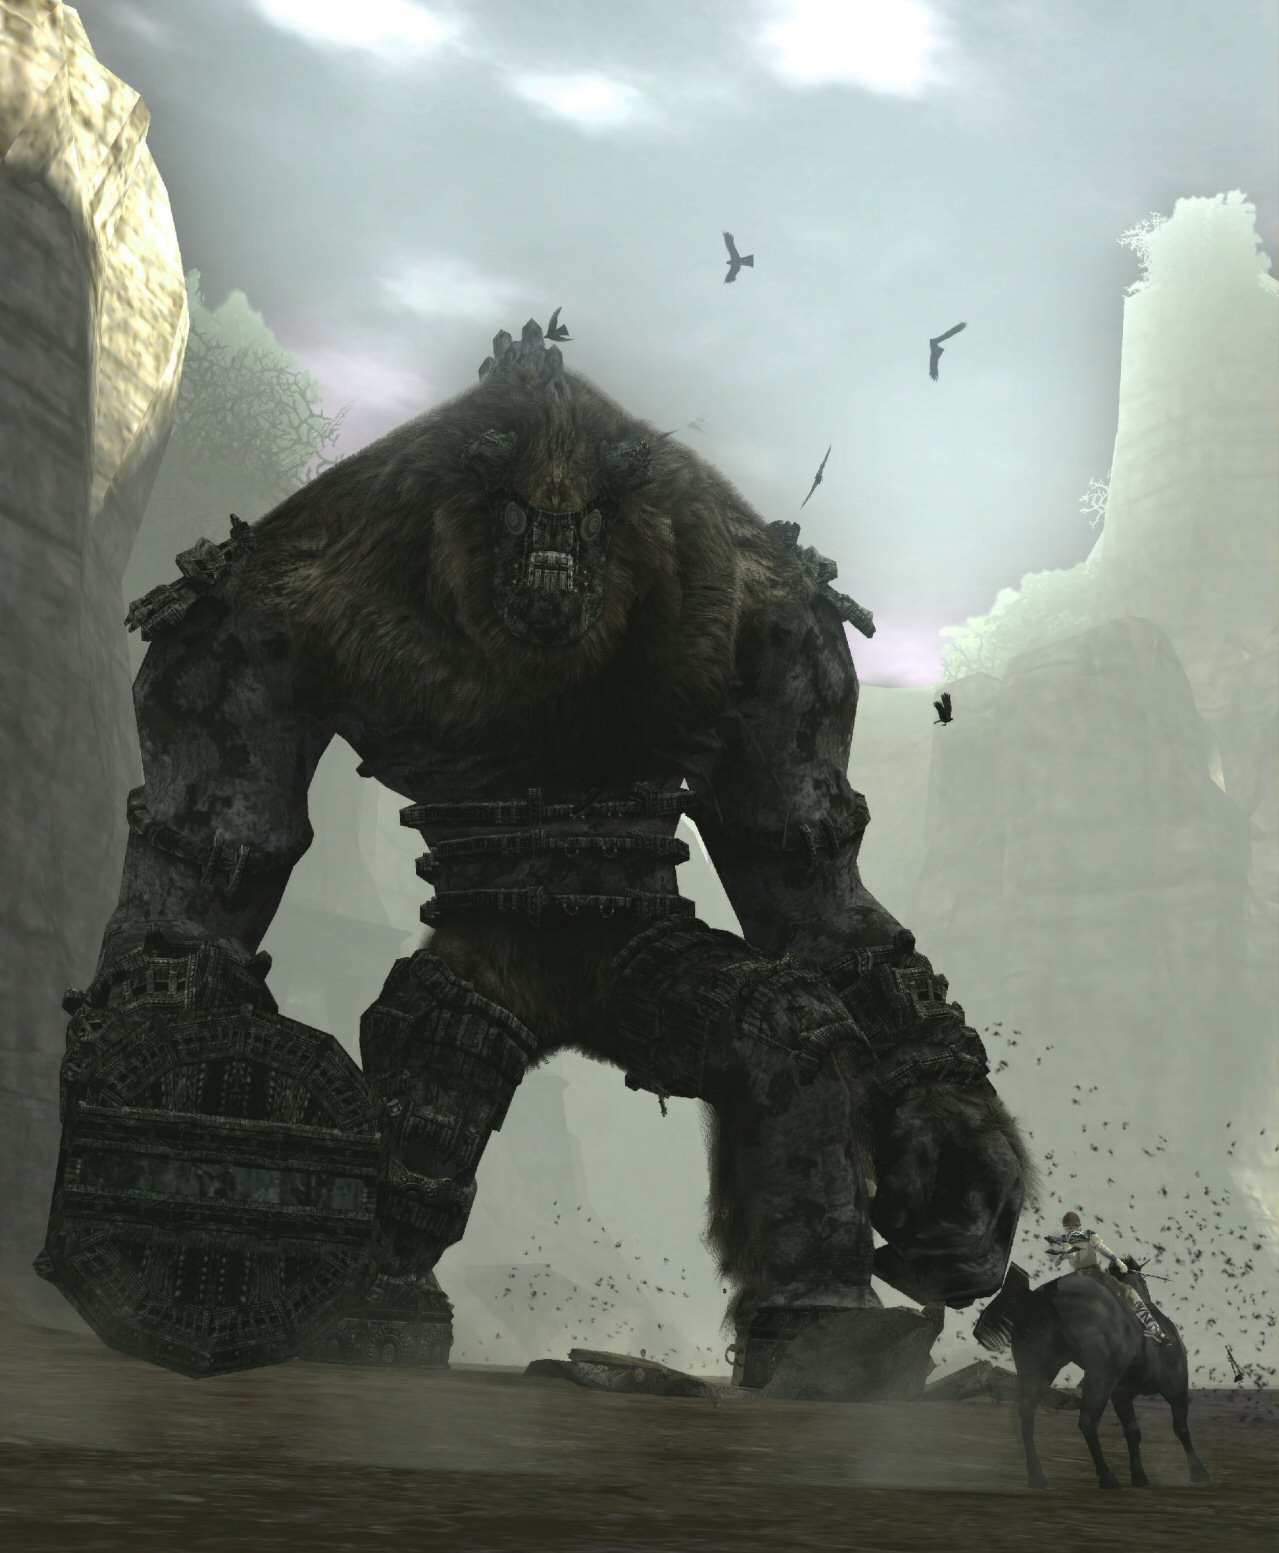 Amazoncom: Shadow of the Colossus - PlayStation 4: Sony